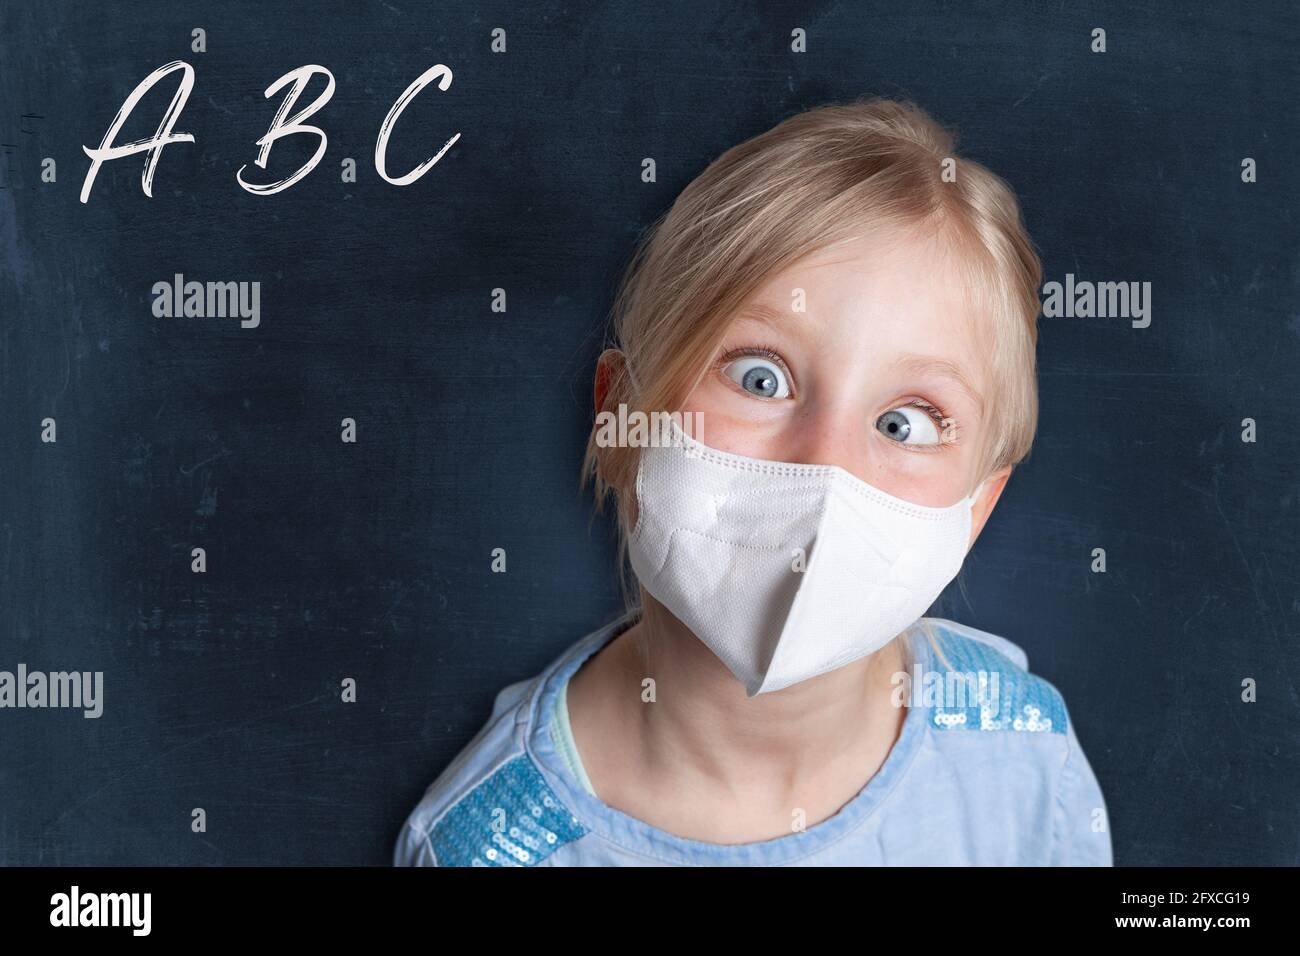 Girl with crossed eyes wearing face mask against black background with alphabets Stock Photo